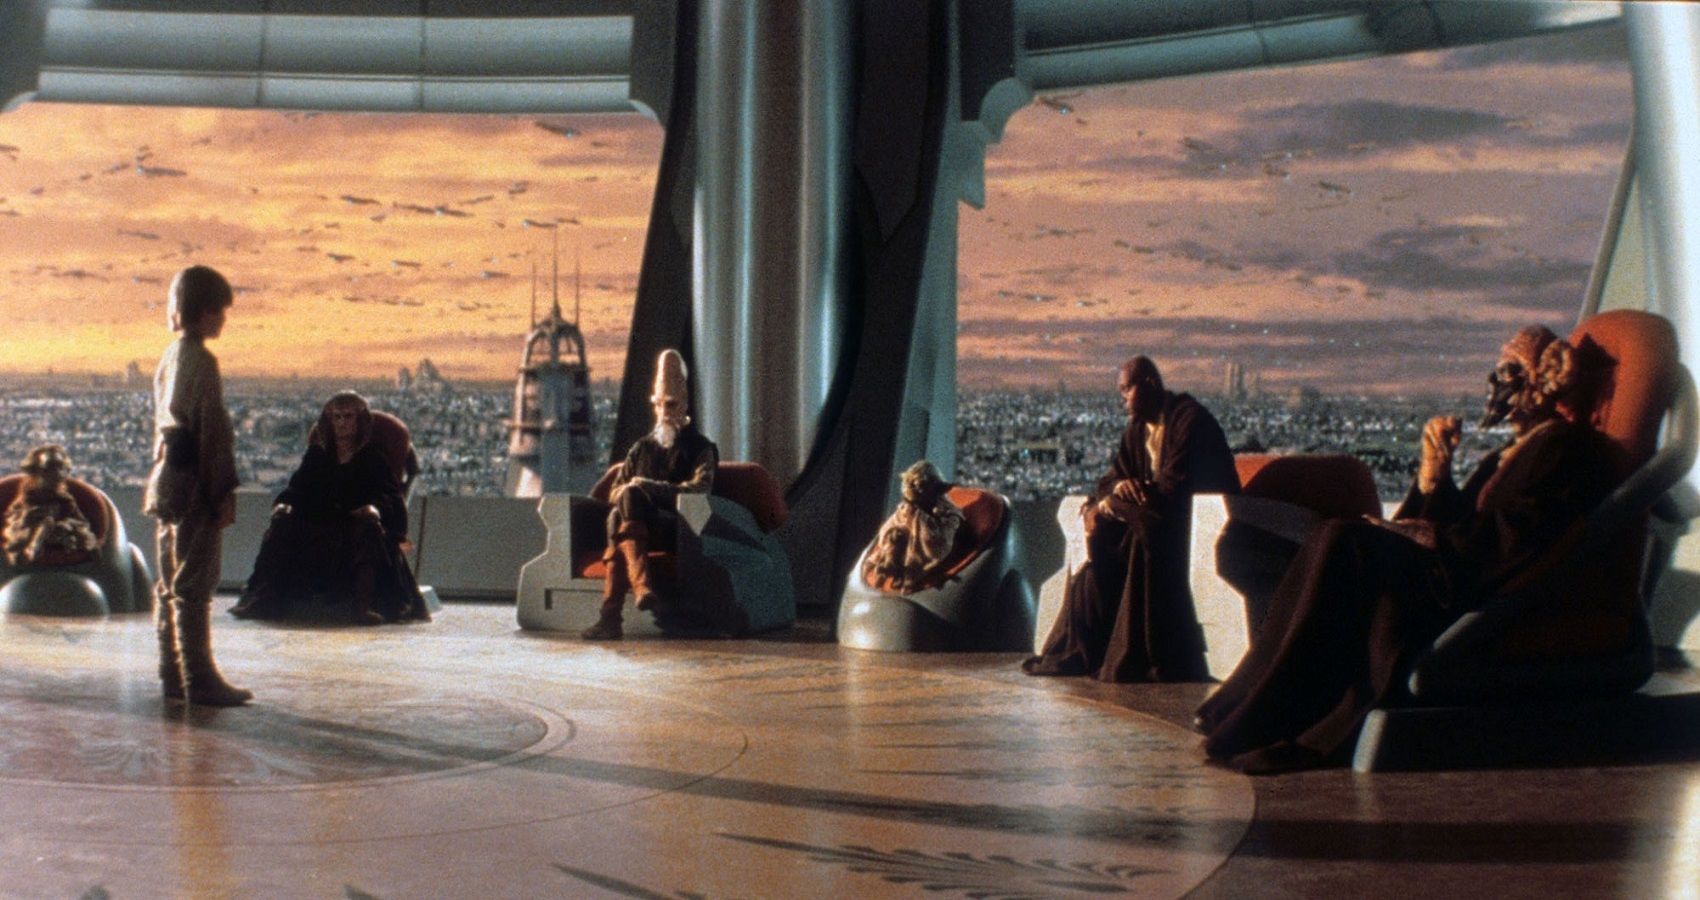 Star Wars Prequels 5 Times The Jedi Council Underestimated Anakin Skywalkers Powers (& 5 Times He Proved Them Wrong)